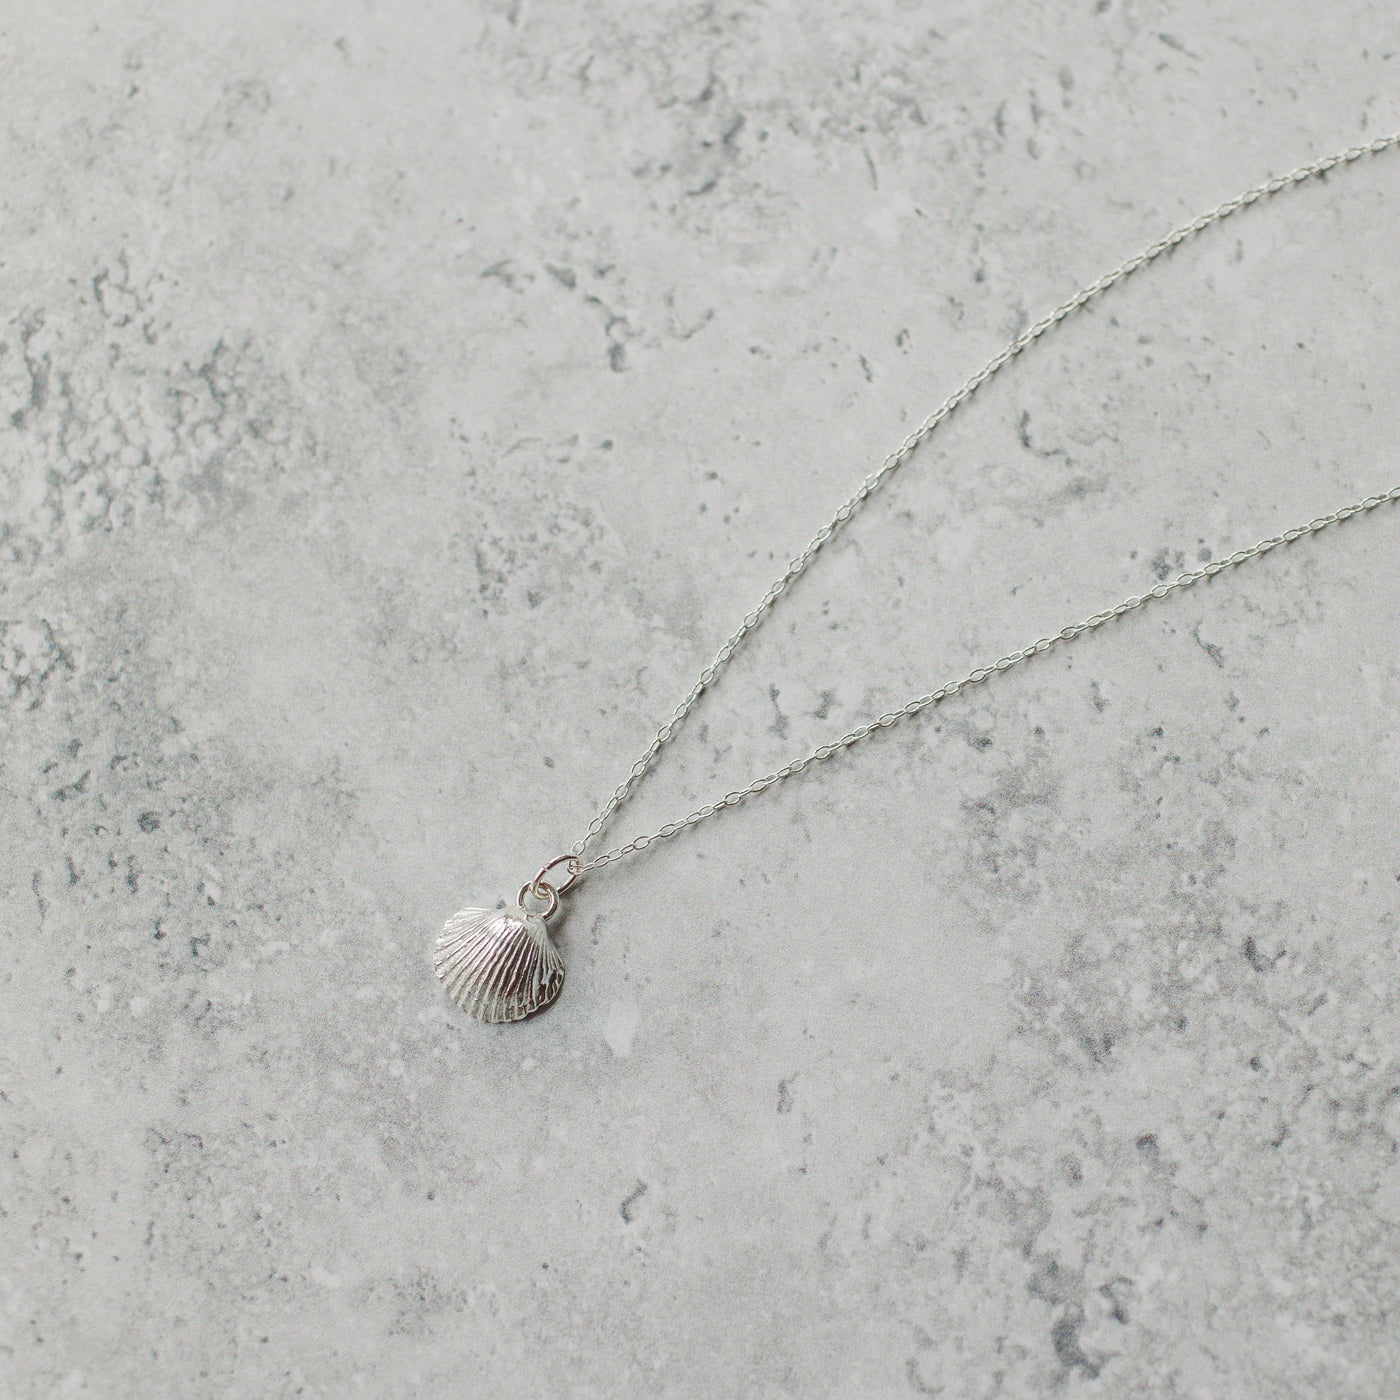 Silver Baby Cockle Shell Necklace